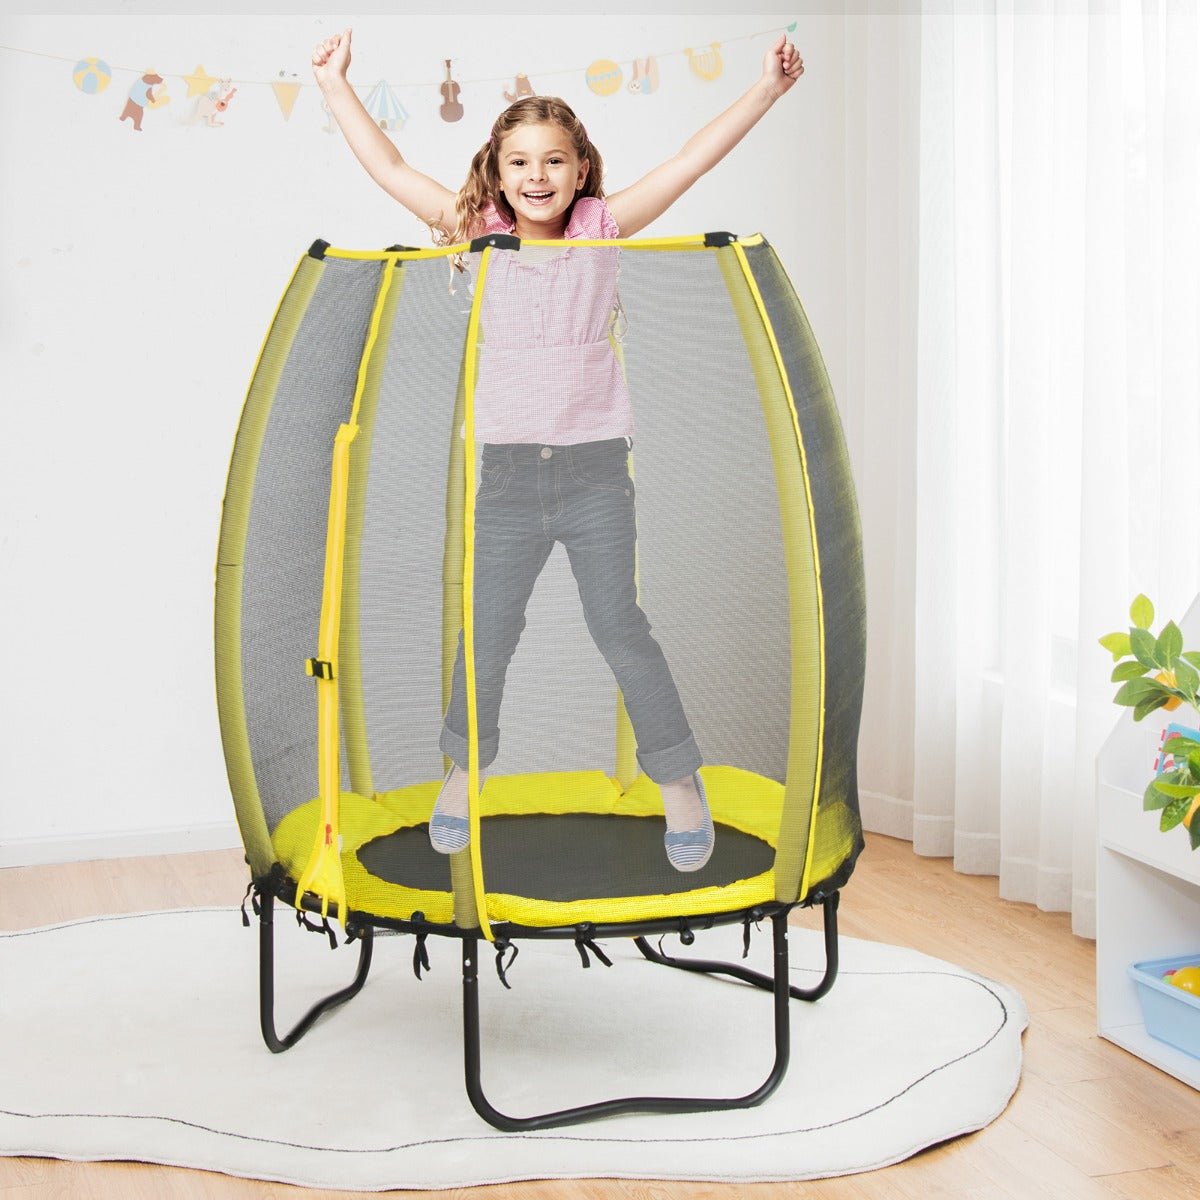 Secure Outdoor Fun: 42 Inches Trampoline with Enclosure Net and Safety Pad